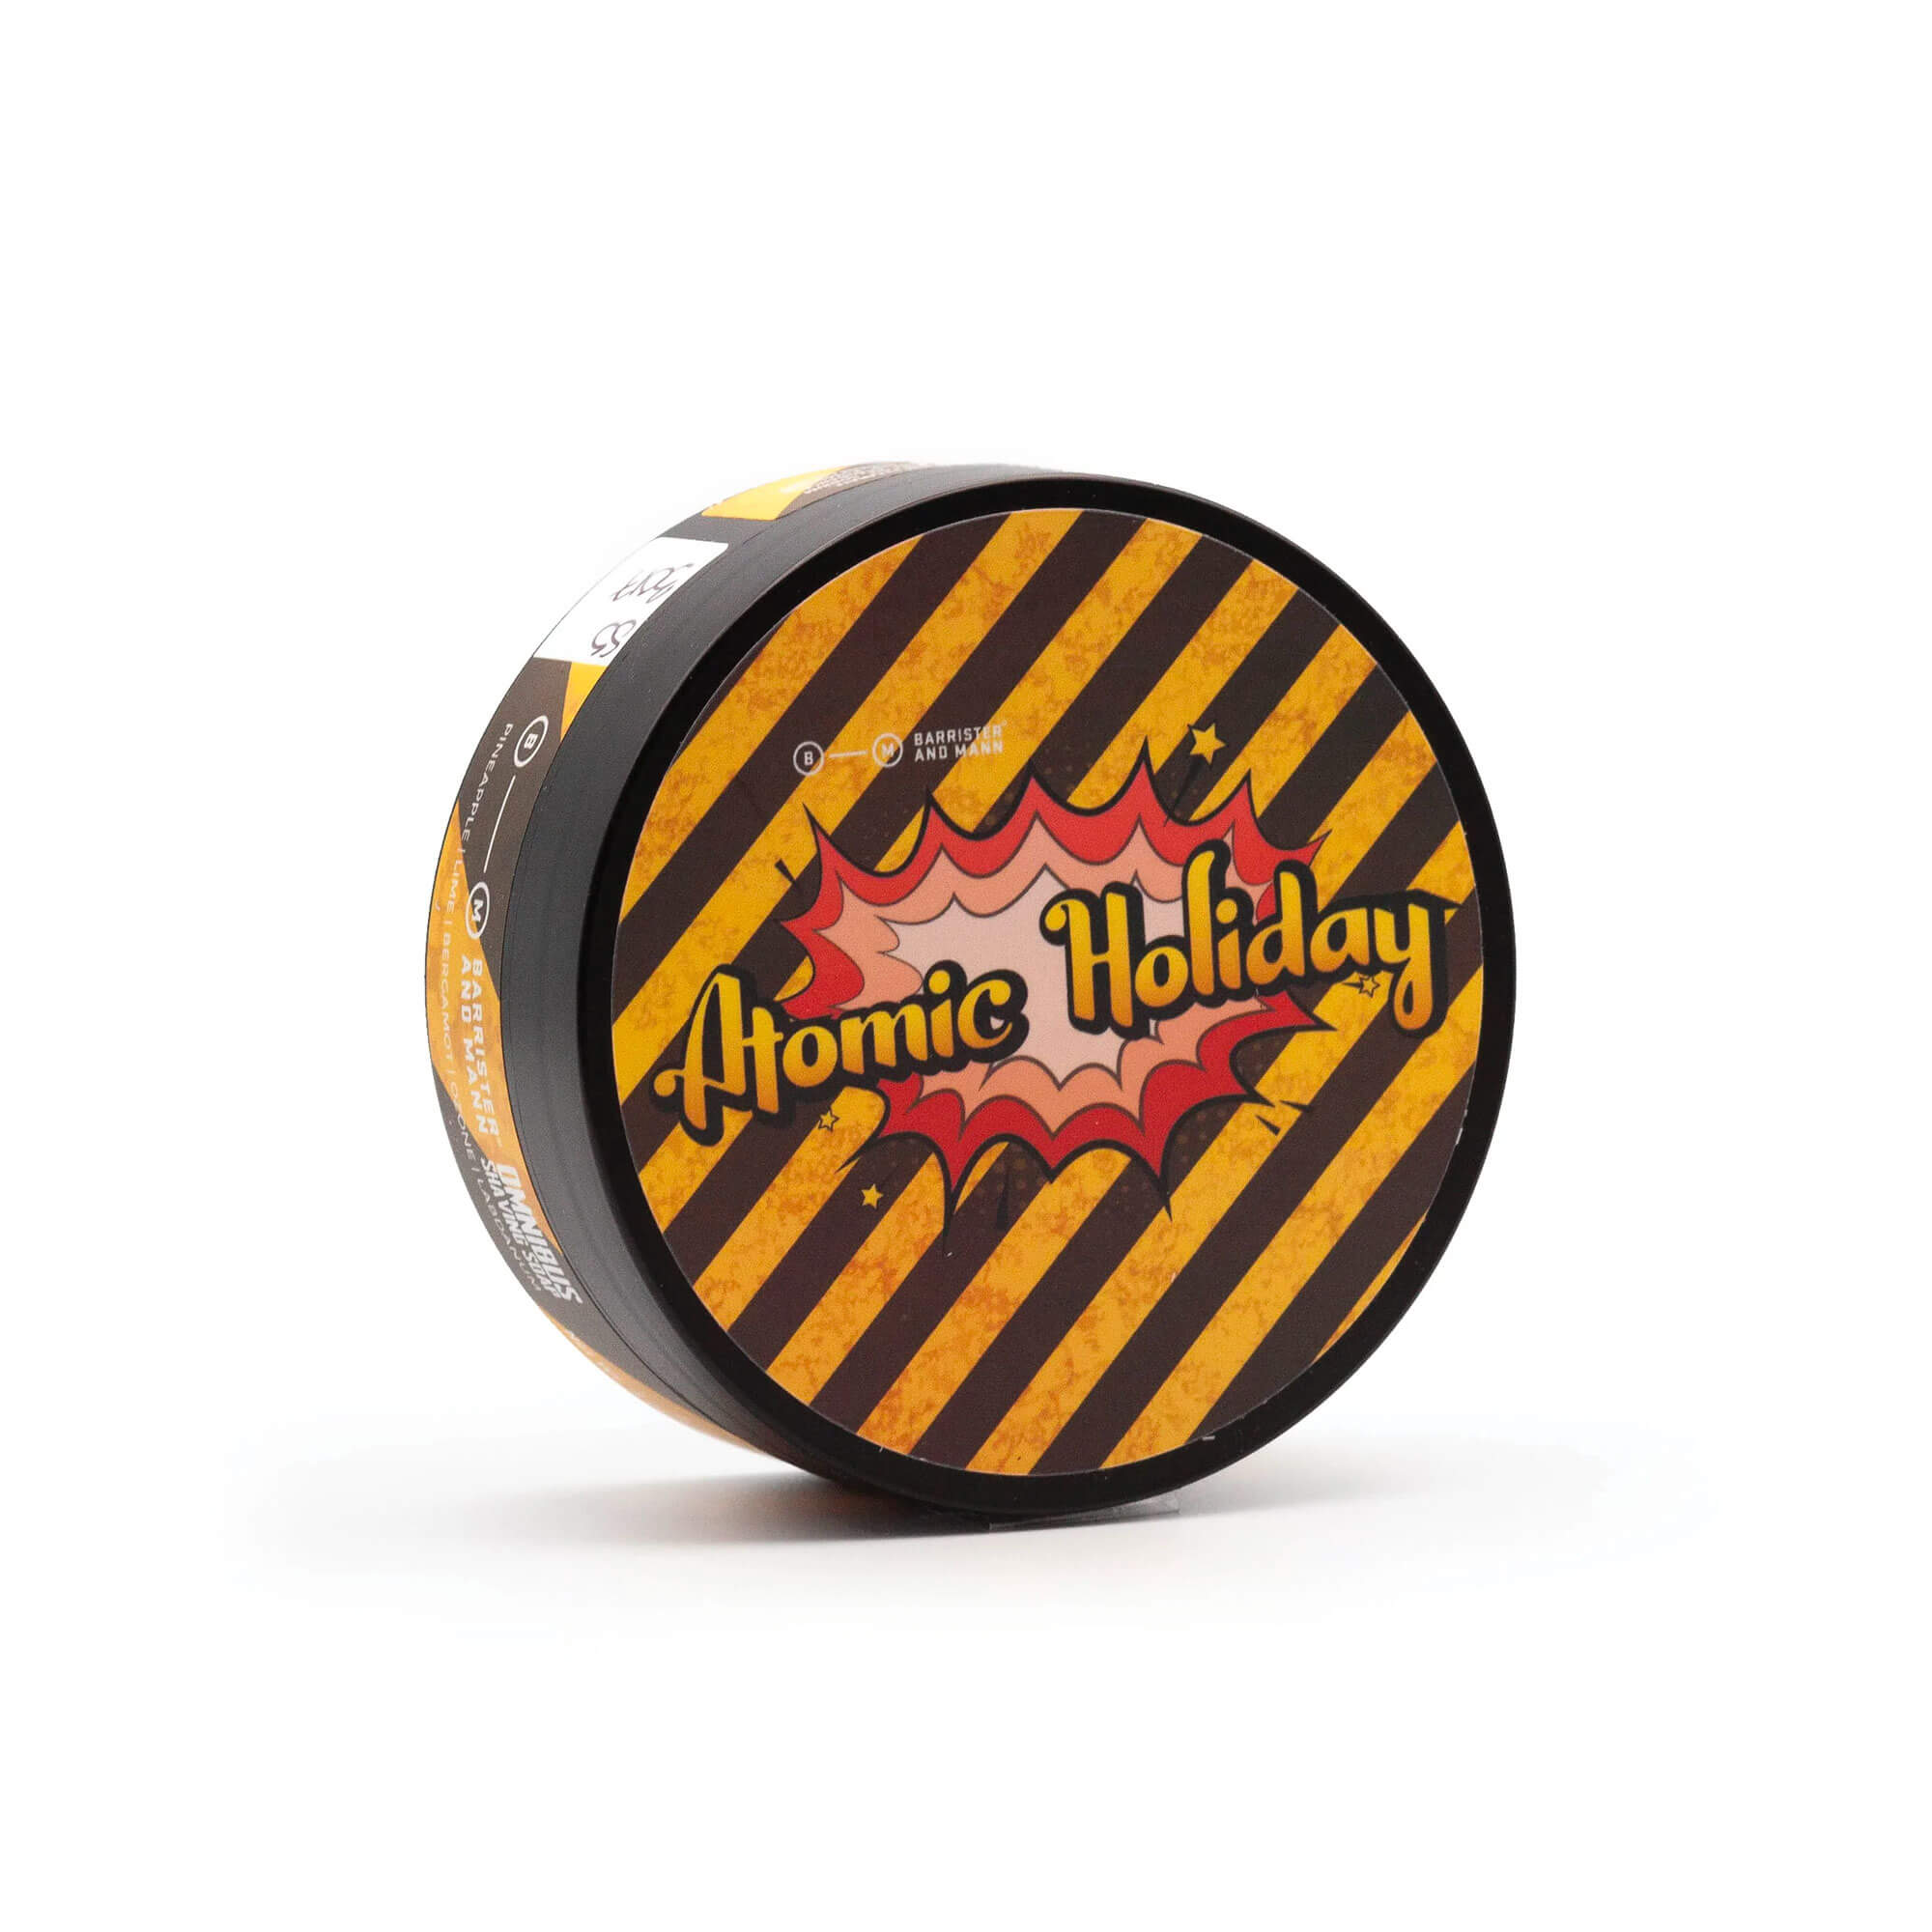 Barrister and Mann Atomic Holiday Shaving Soap